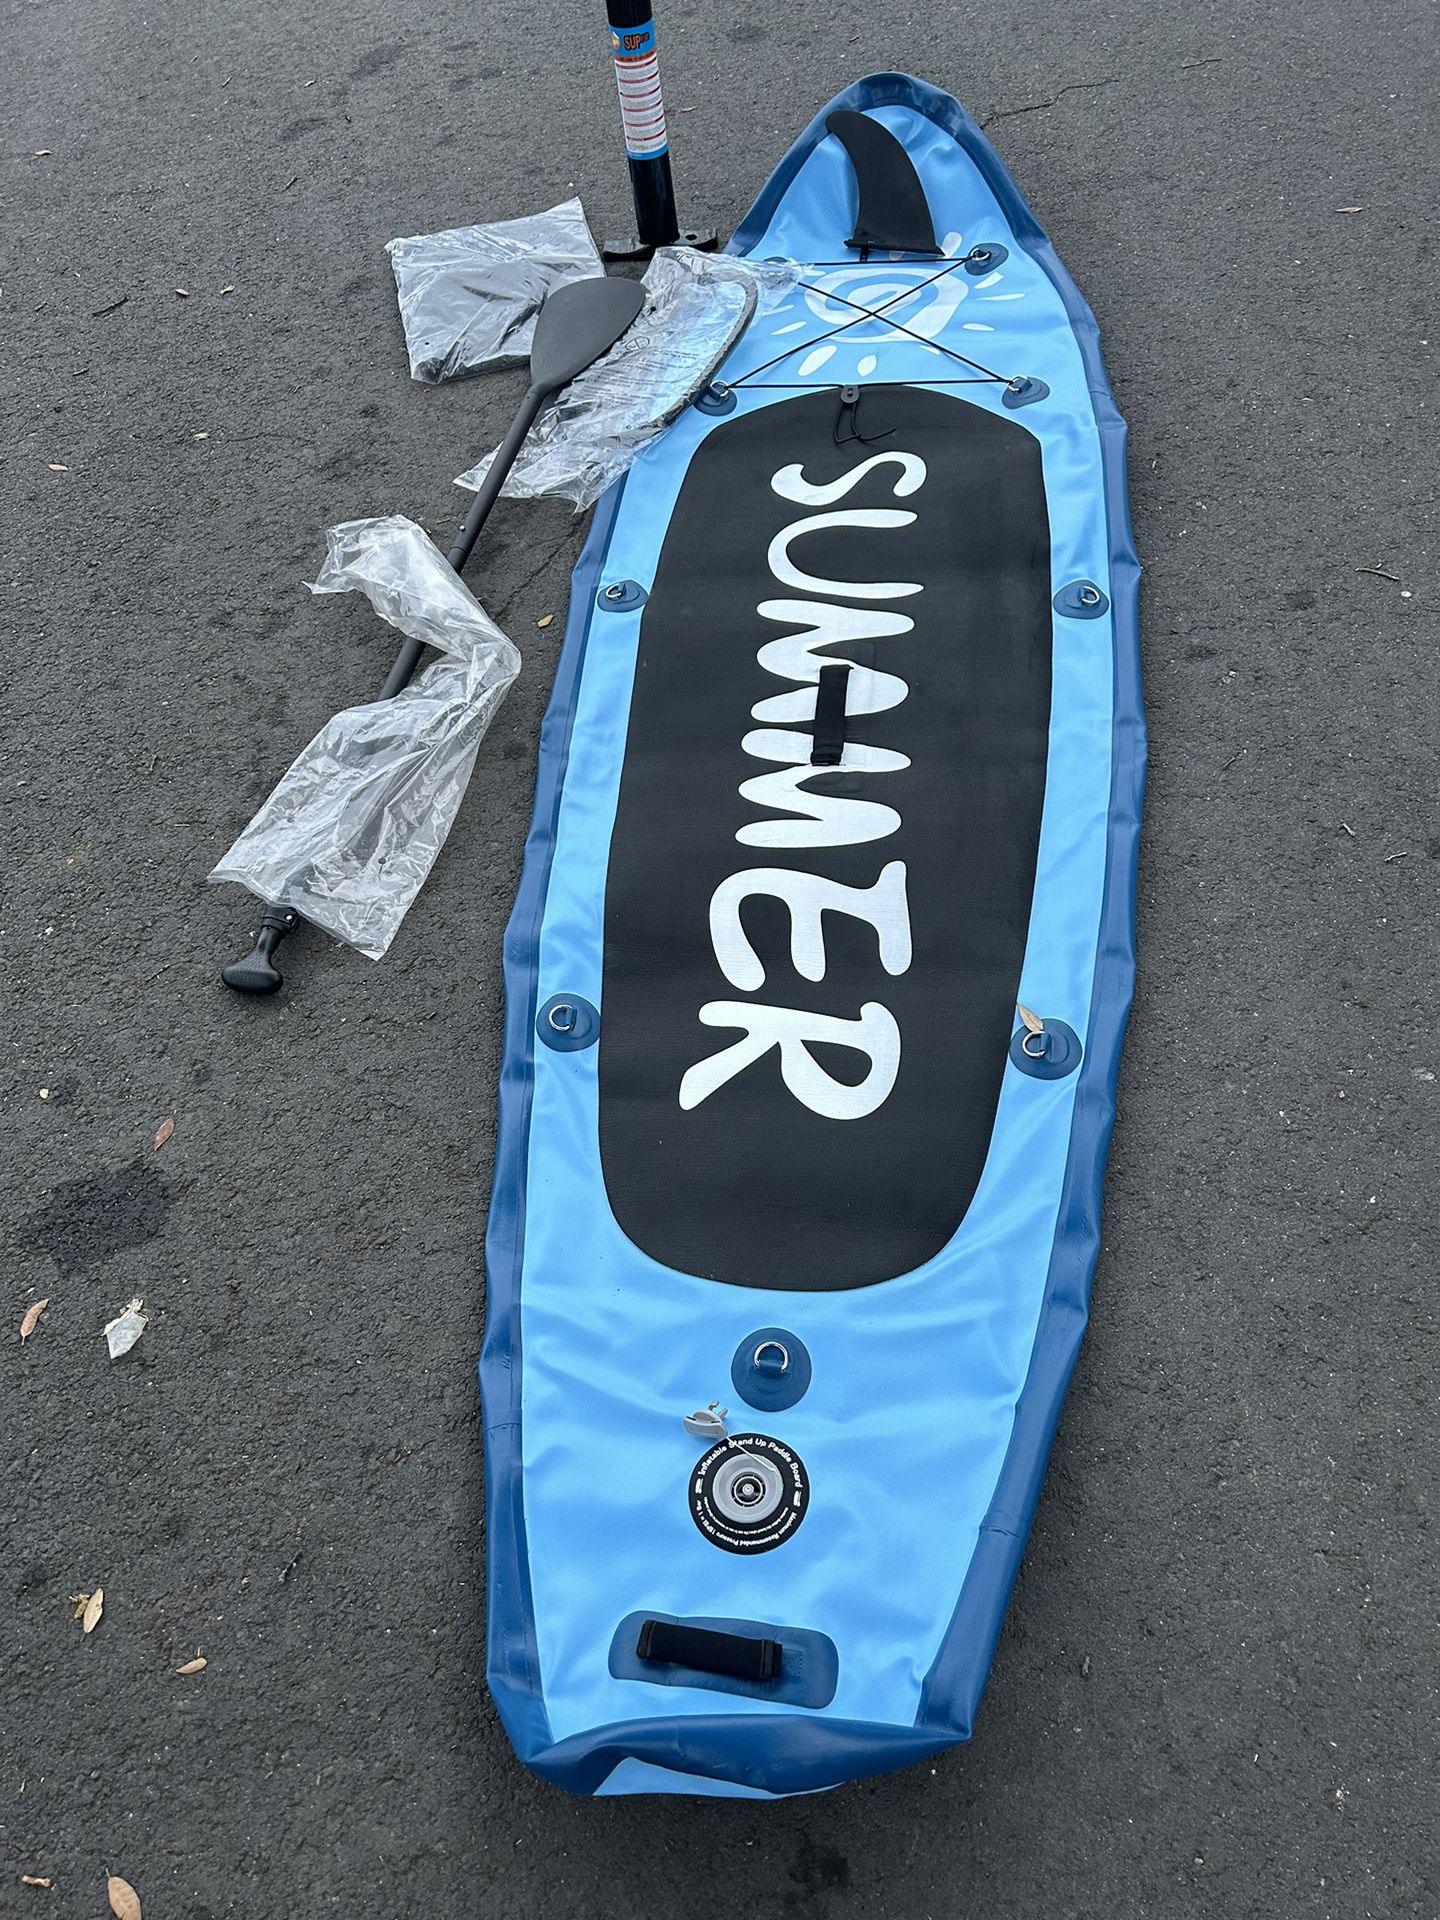 Brand New Inflatable 10 Foot Paddleboard With Pump Backpack For $140 